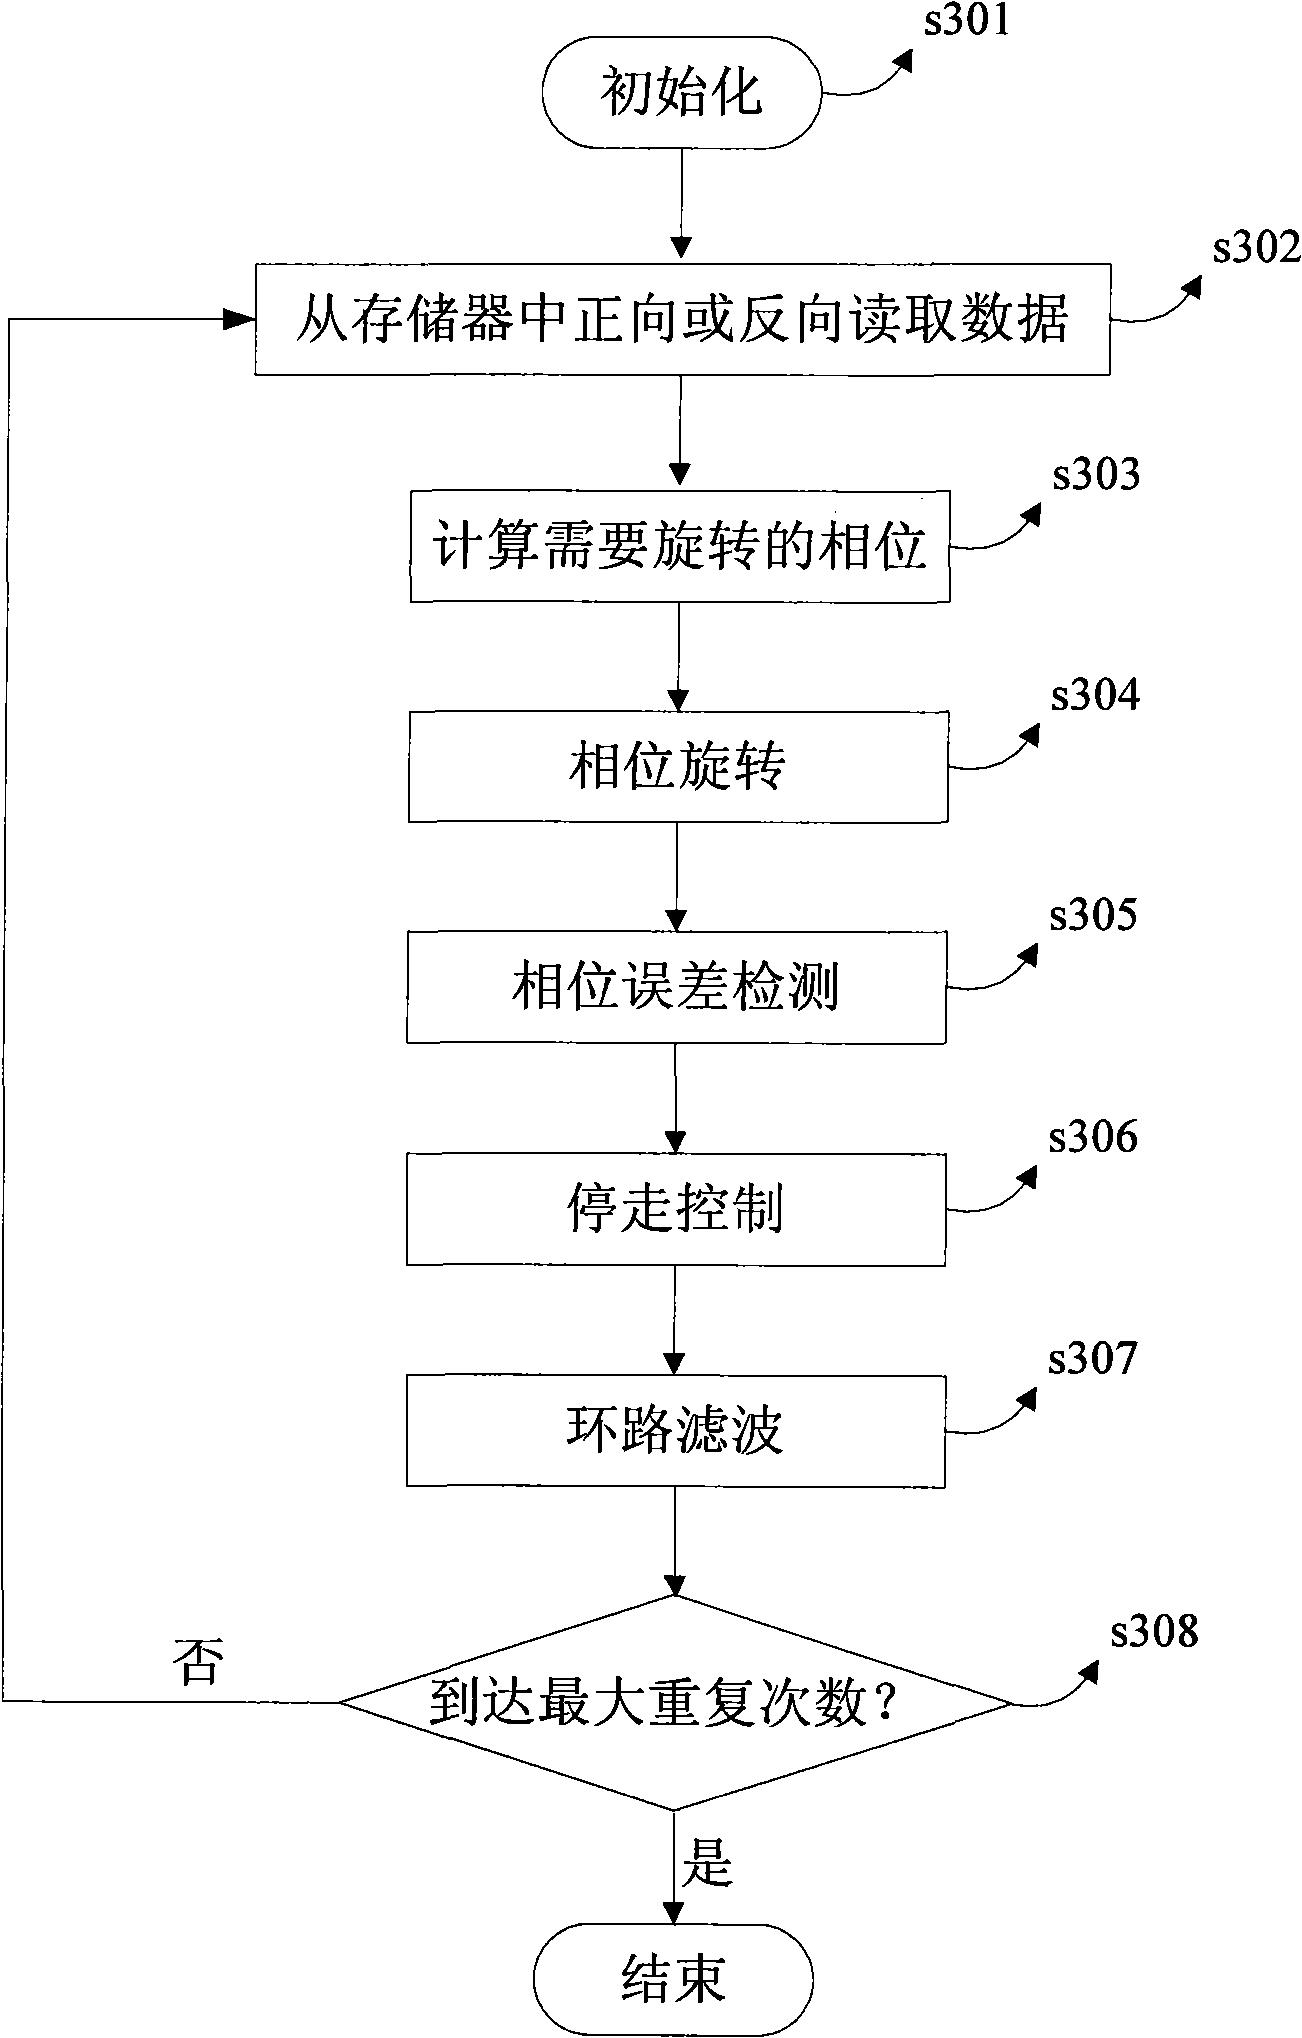 Method and system for non-data-aided synchronization of wireless burst communication all-digital receiver